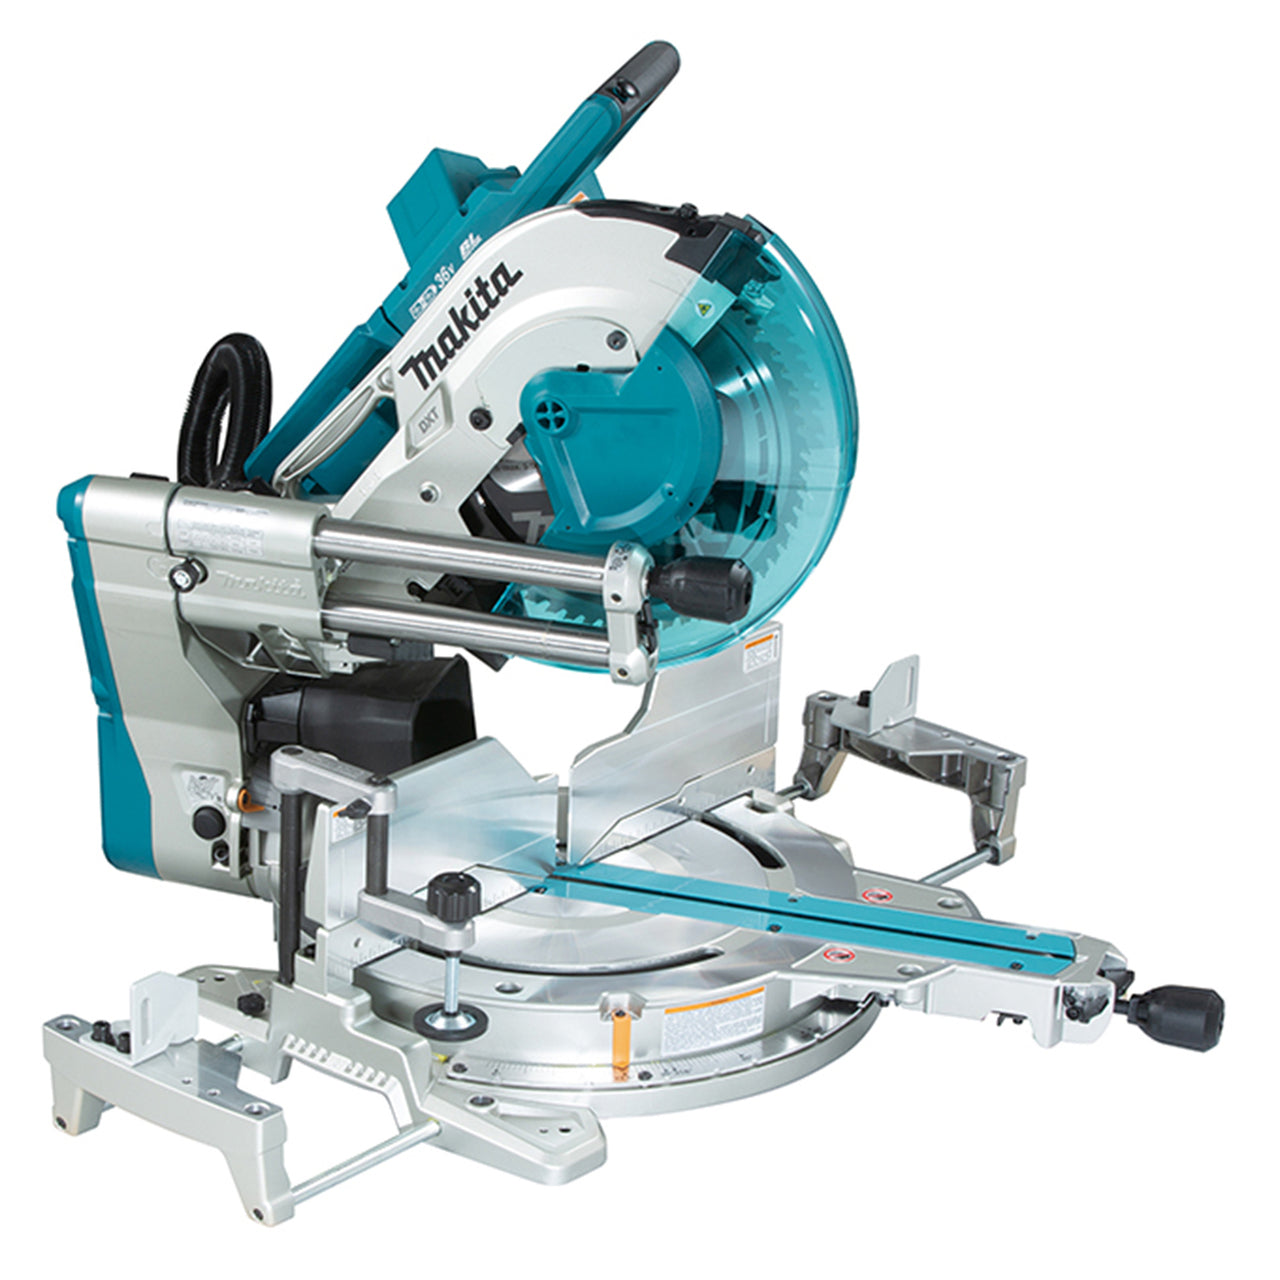 Makita DLS212ZCOMBO -  12" Cordless Sliding Compound Mitre Saw with Brushless Motor & Laser (Tool Only) - wise-line-tools